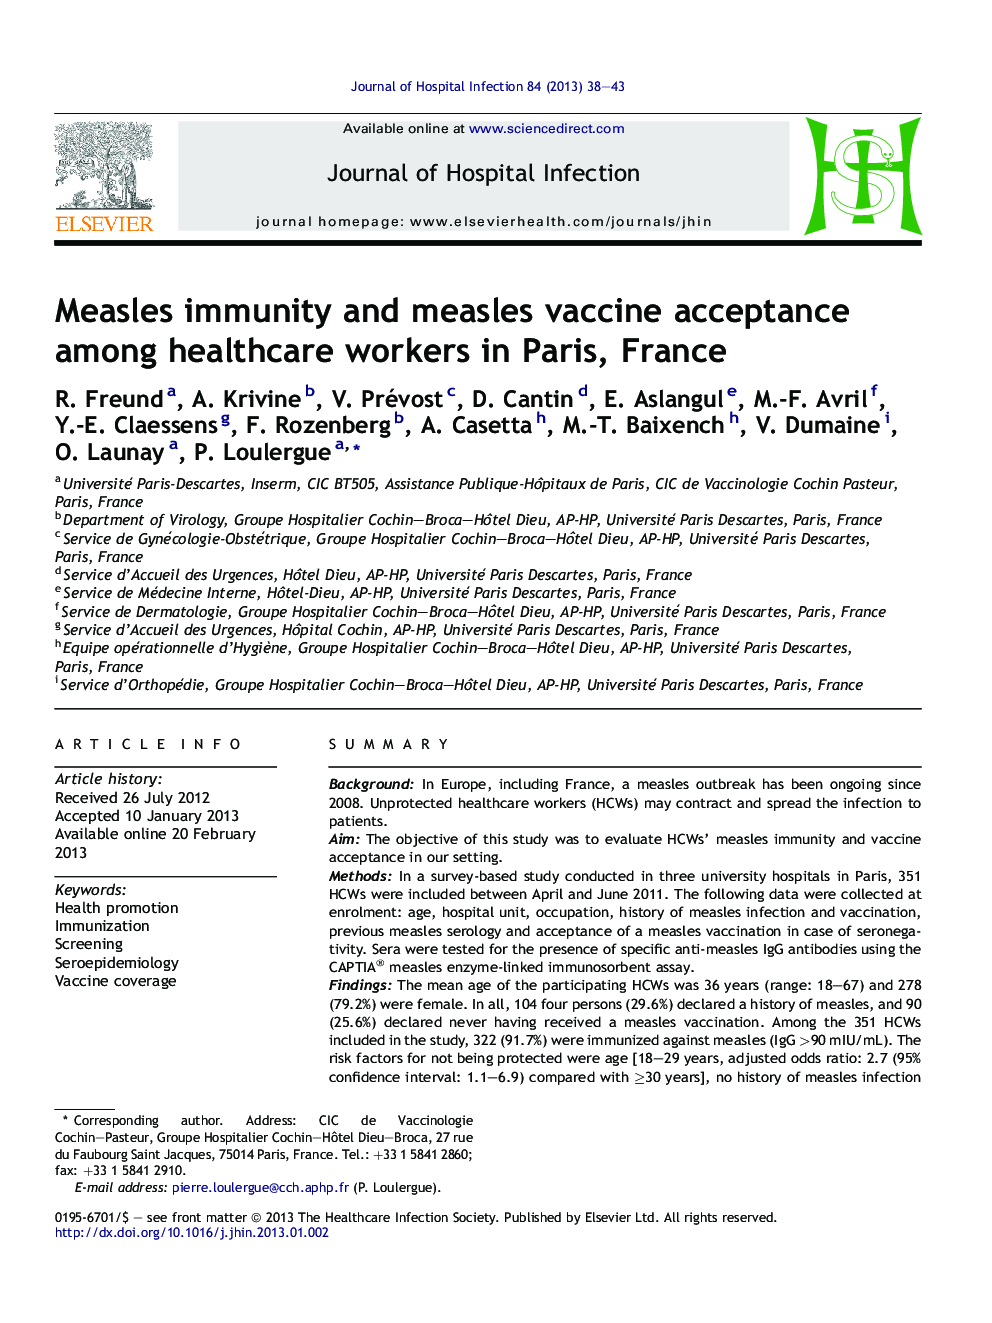 Measles immunity and measles vaccine acceptance among healthcare workers in Paris, France